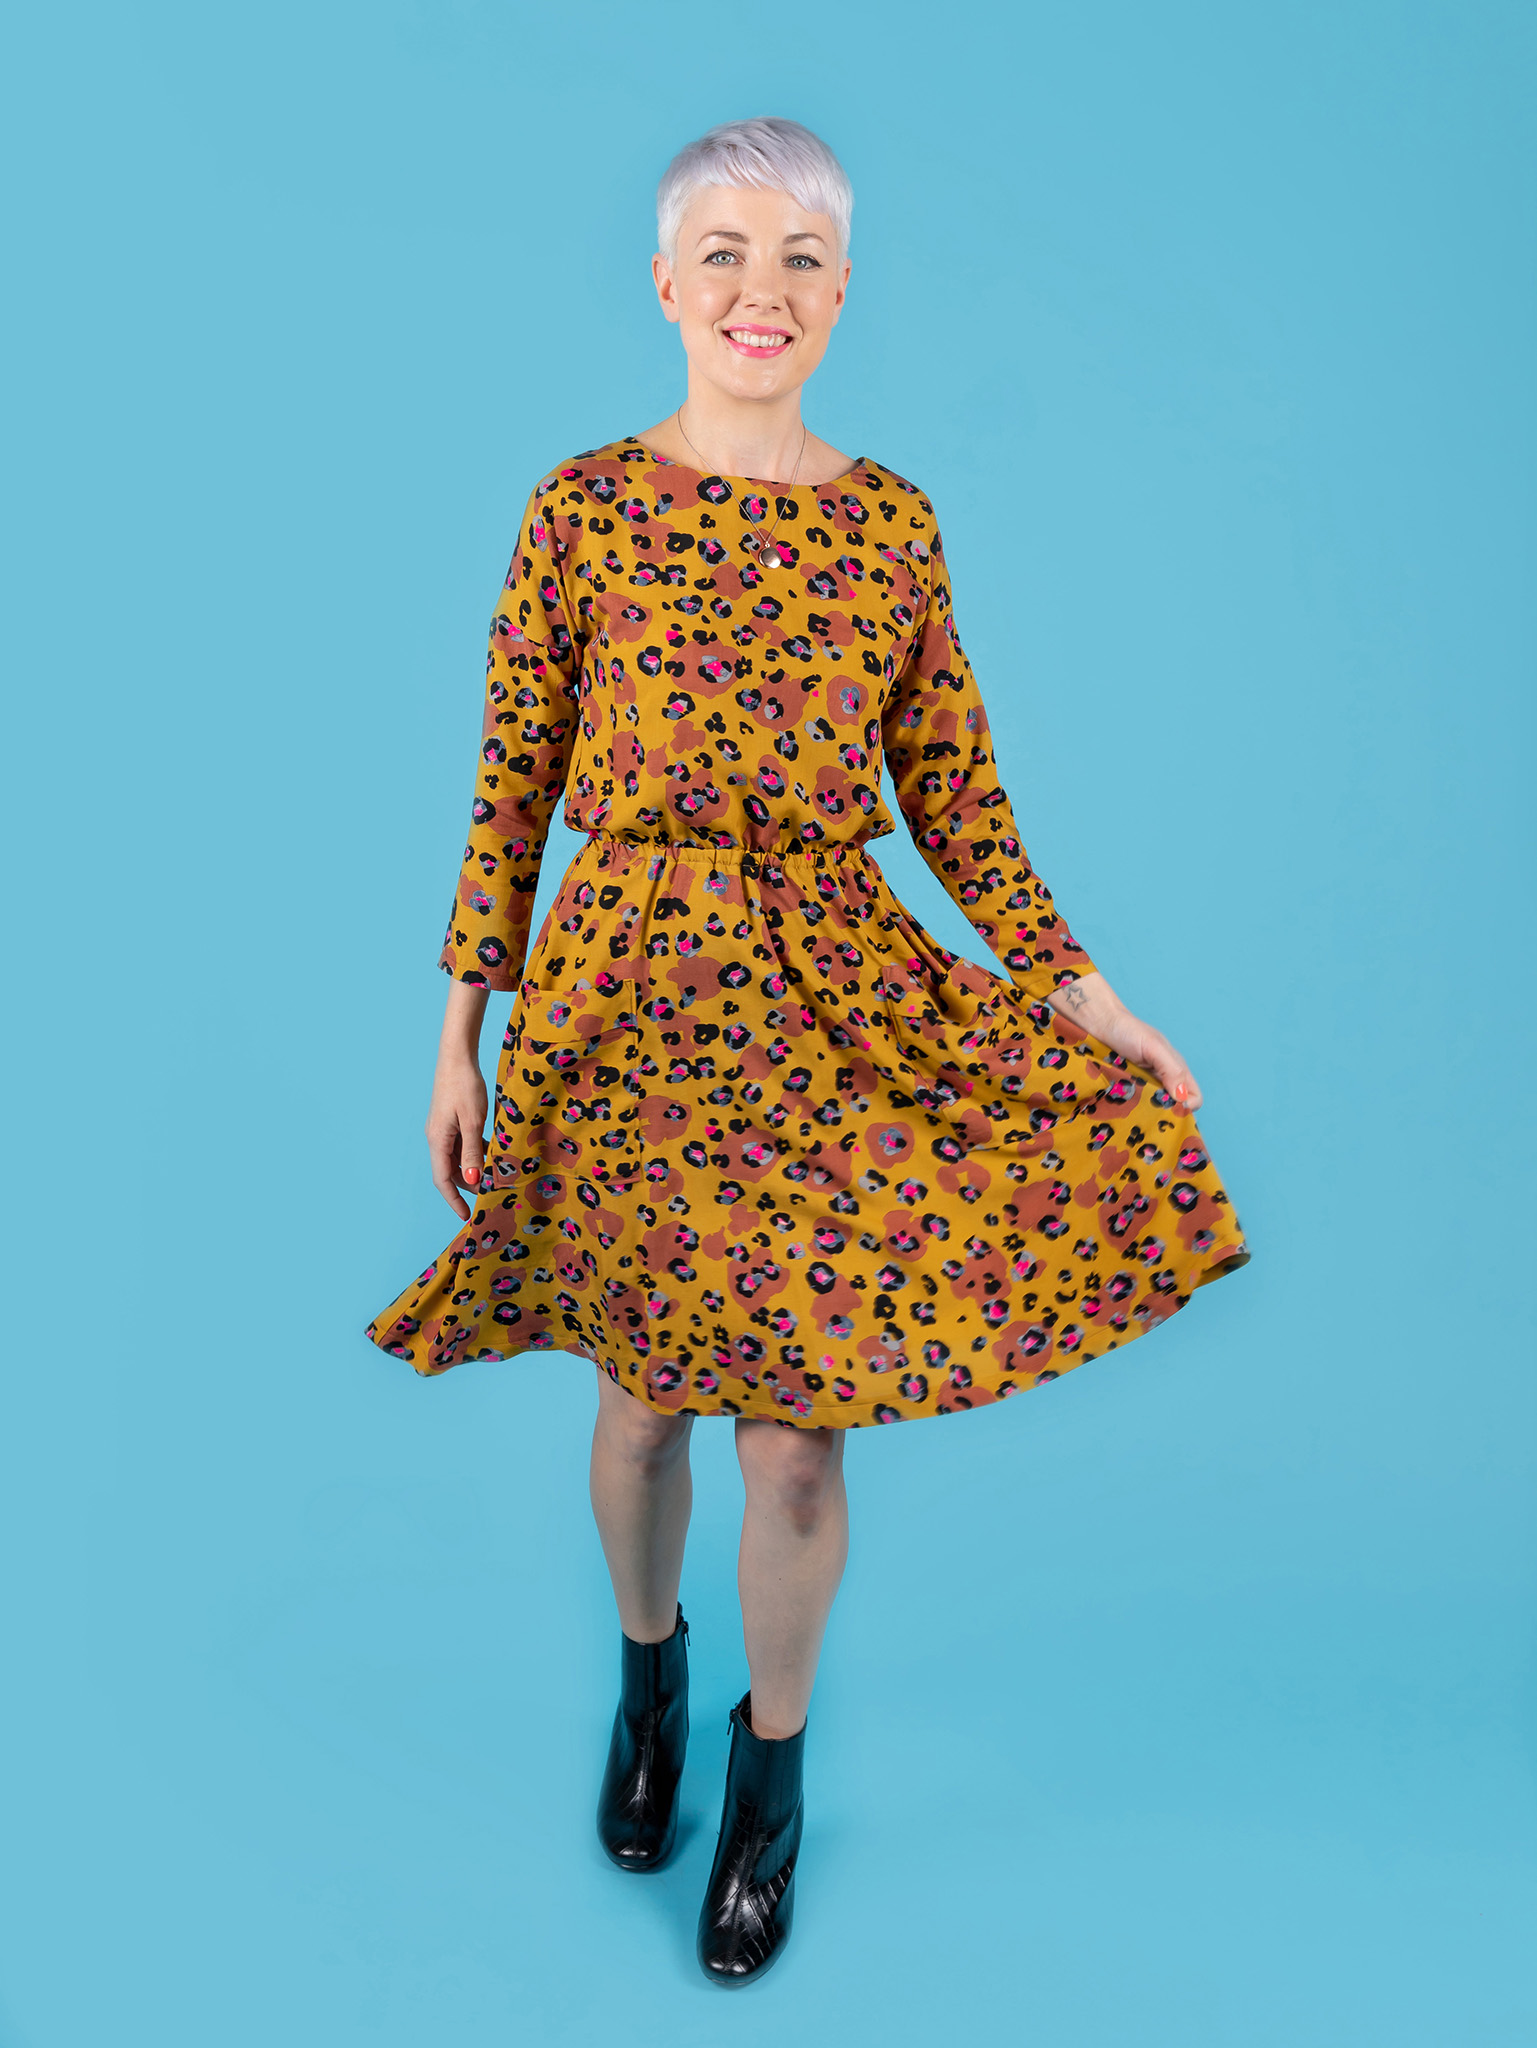 Tilly and the Buttons: How to Embroider Flowers on Your Clothing